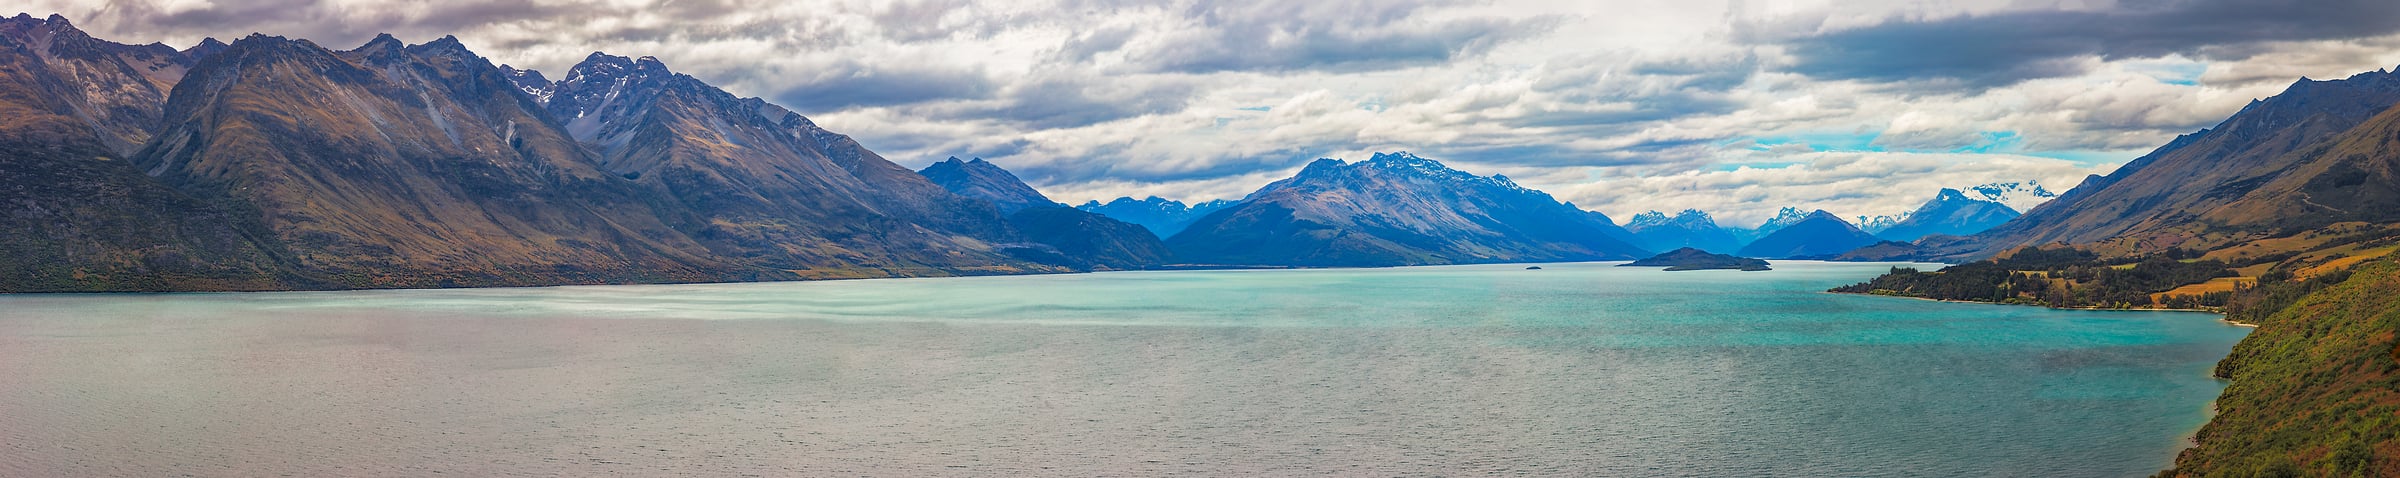 1,366 megapixels! A very high resolution, large-format VAST photo print of a mountain lake; landscape photograph created by John Freeman in Bennetts Bluff Lookout, Glenorchy-Queenstown Road, New Zealand